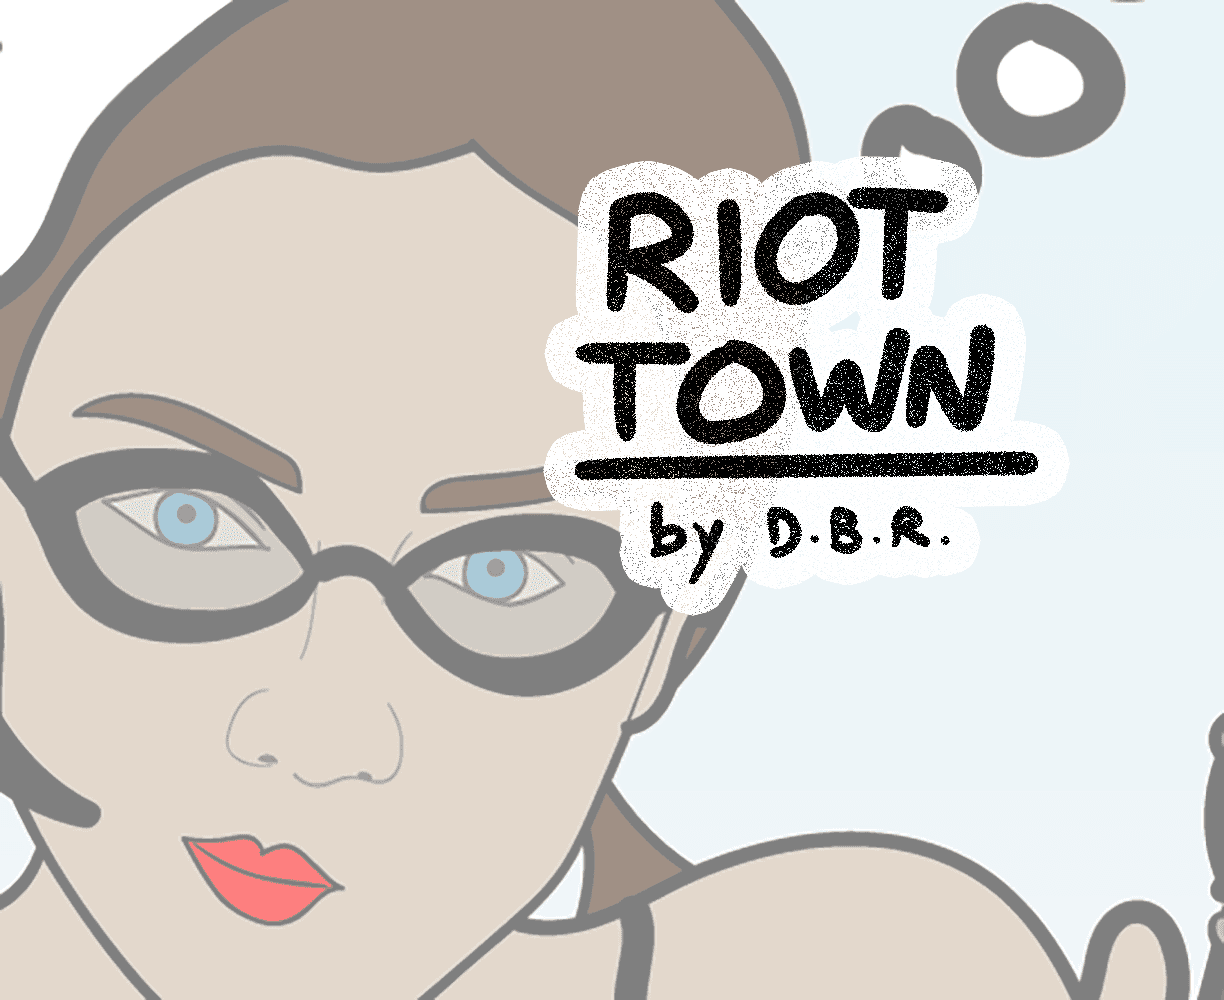 The cover art for the episode Cash Collateral Damage from the comics series Riot Town, USA, which is number 52 in the series